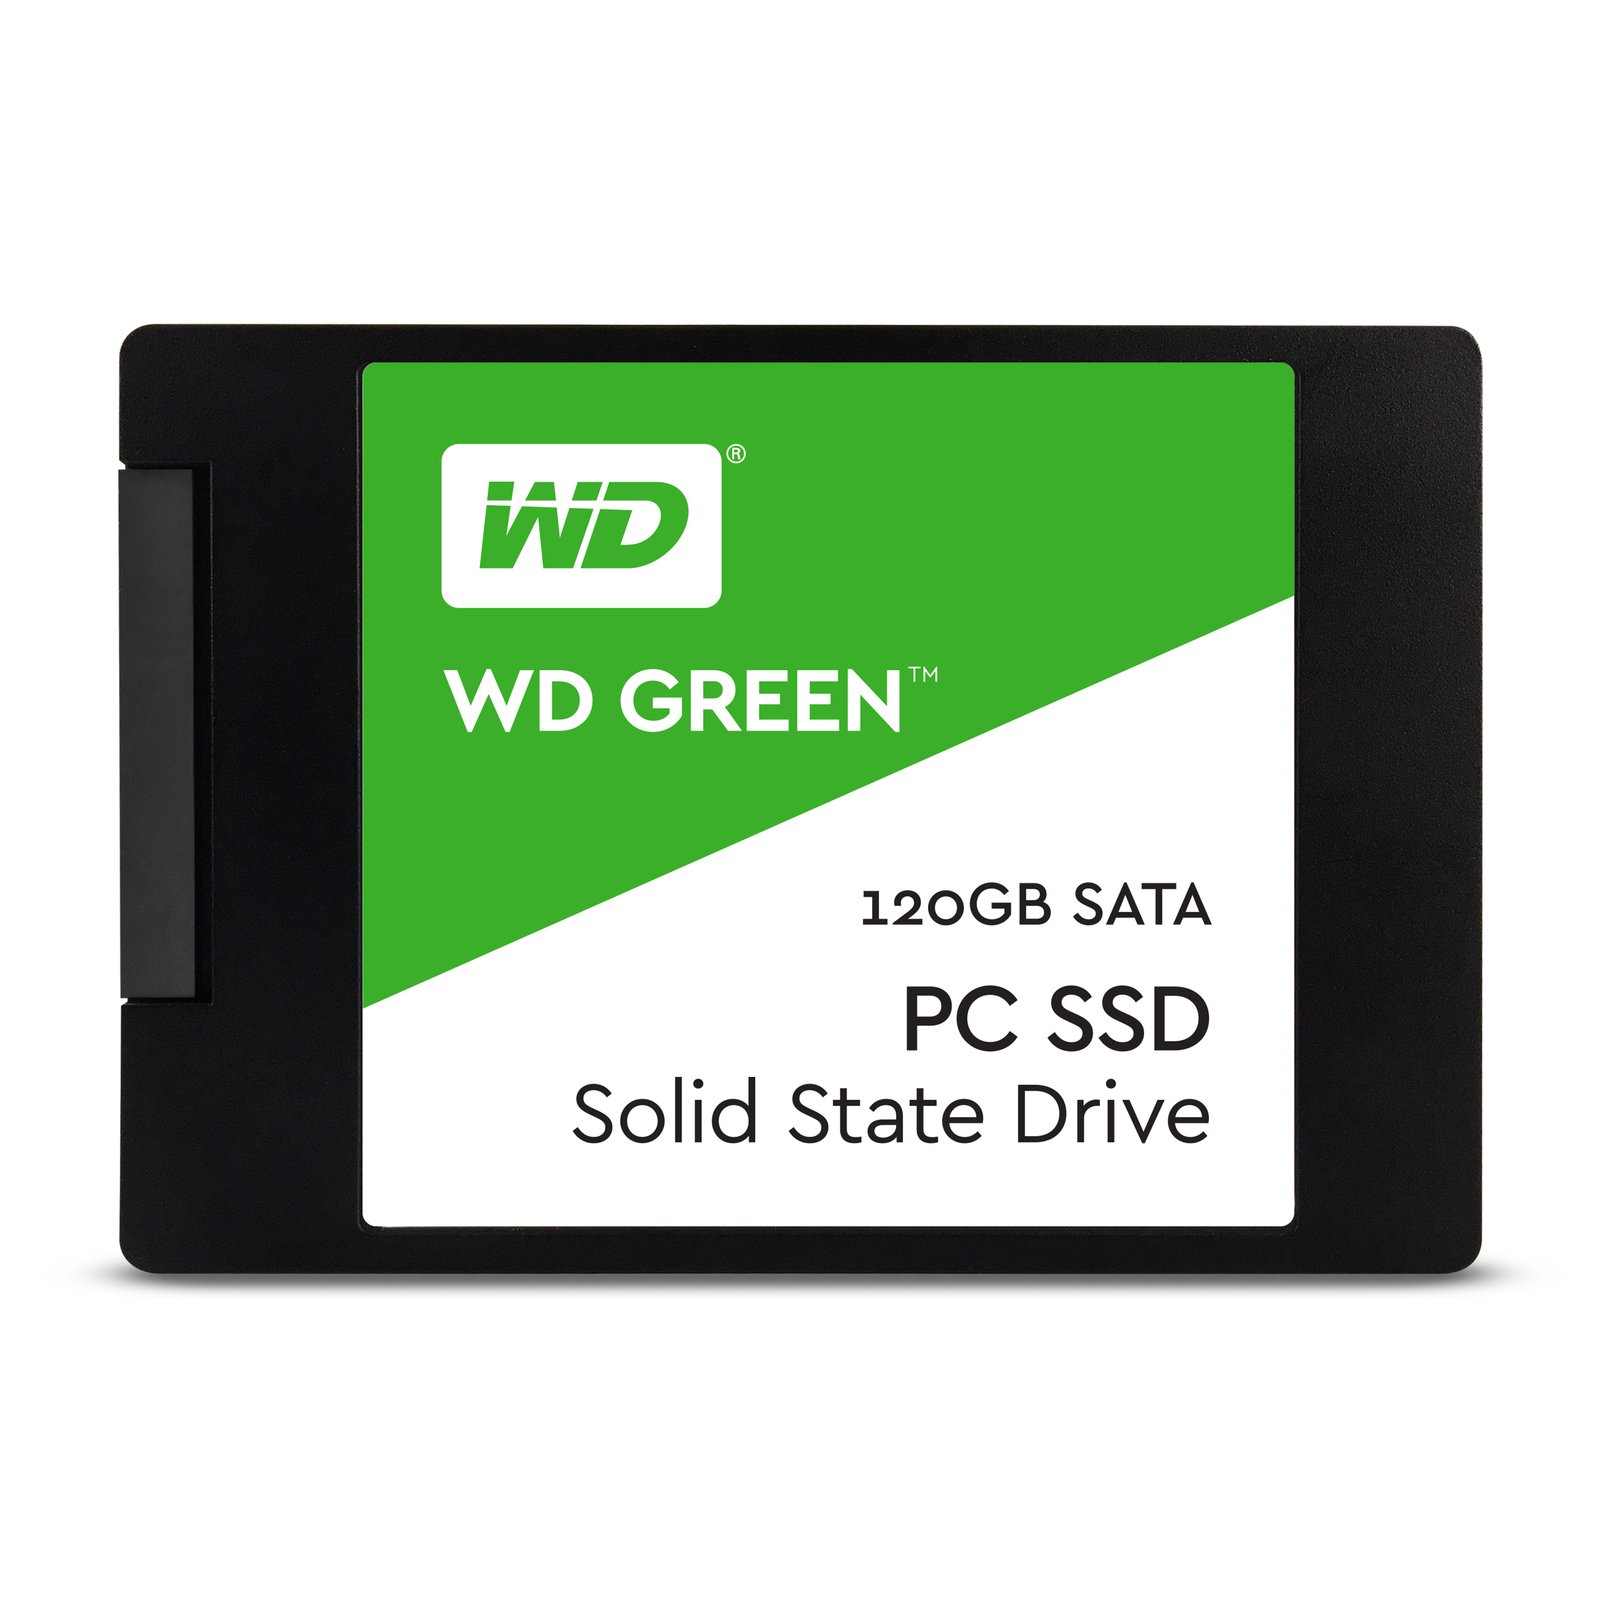 wd-green-2